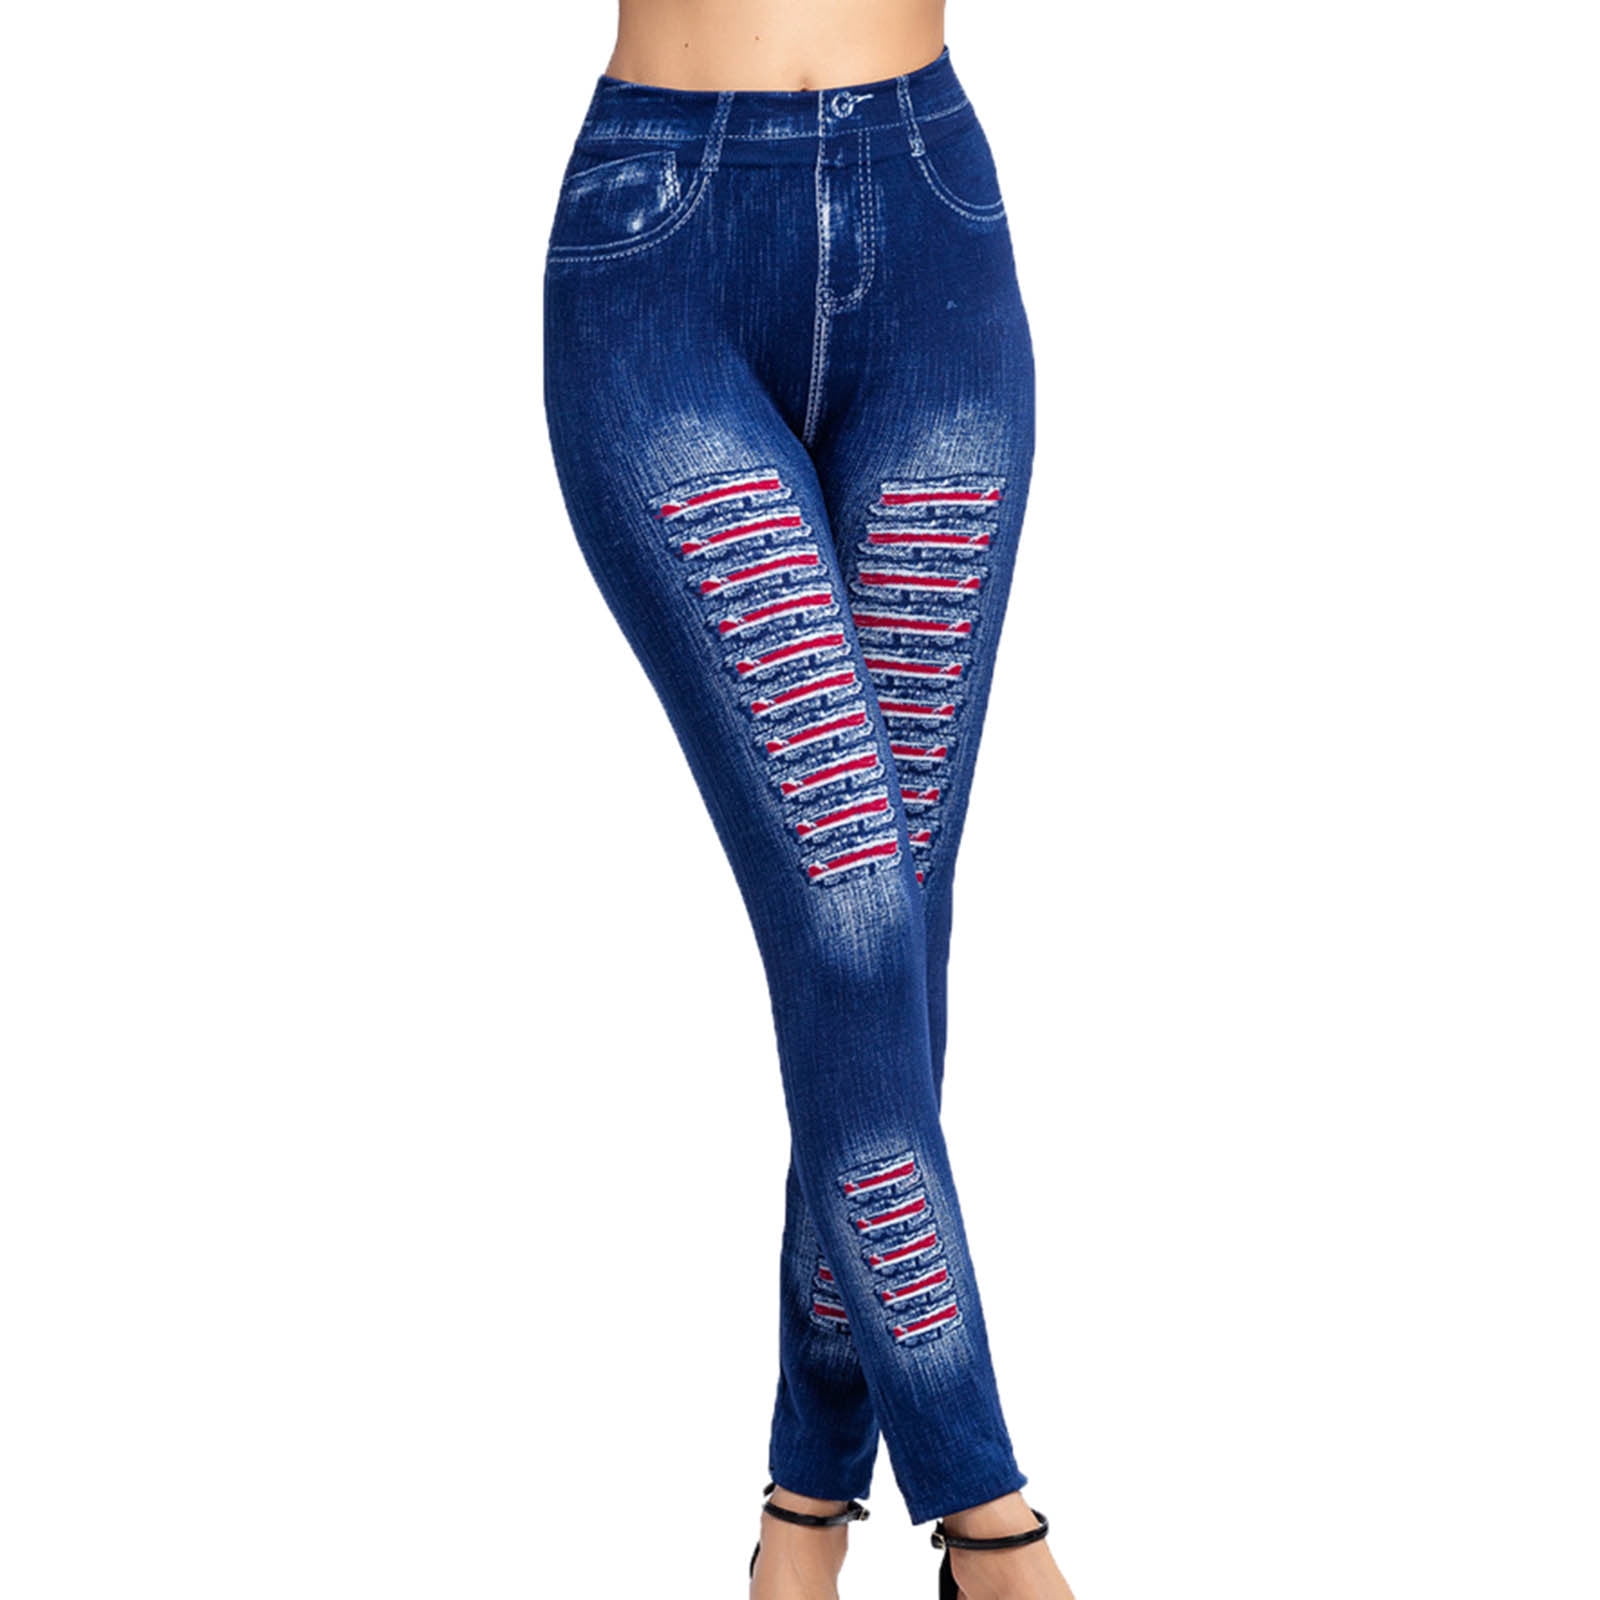 Women's High Waisted Leggings Sexy Lace Stretchy Pull-on Jeggings